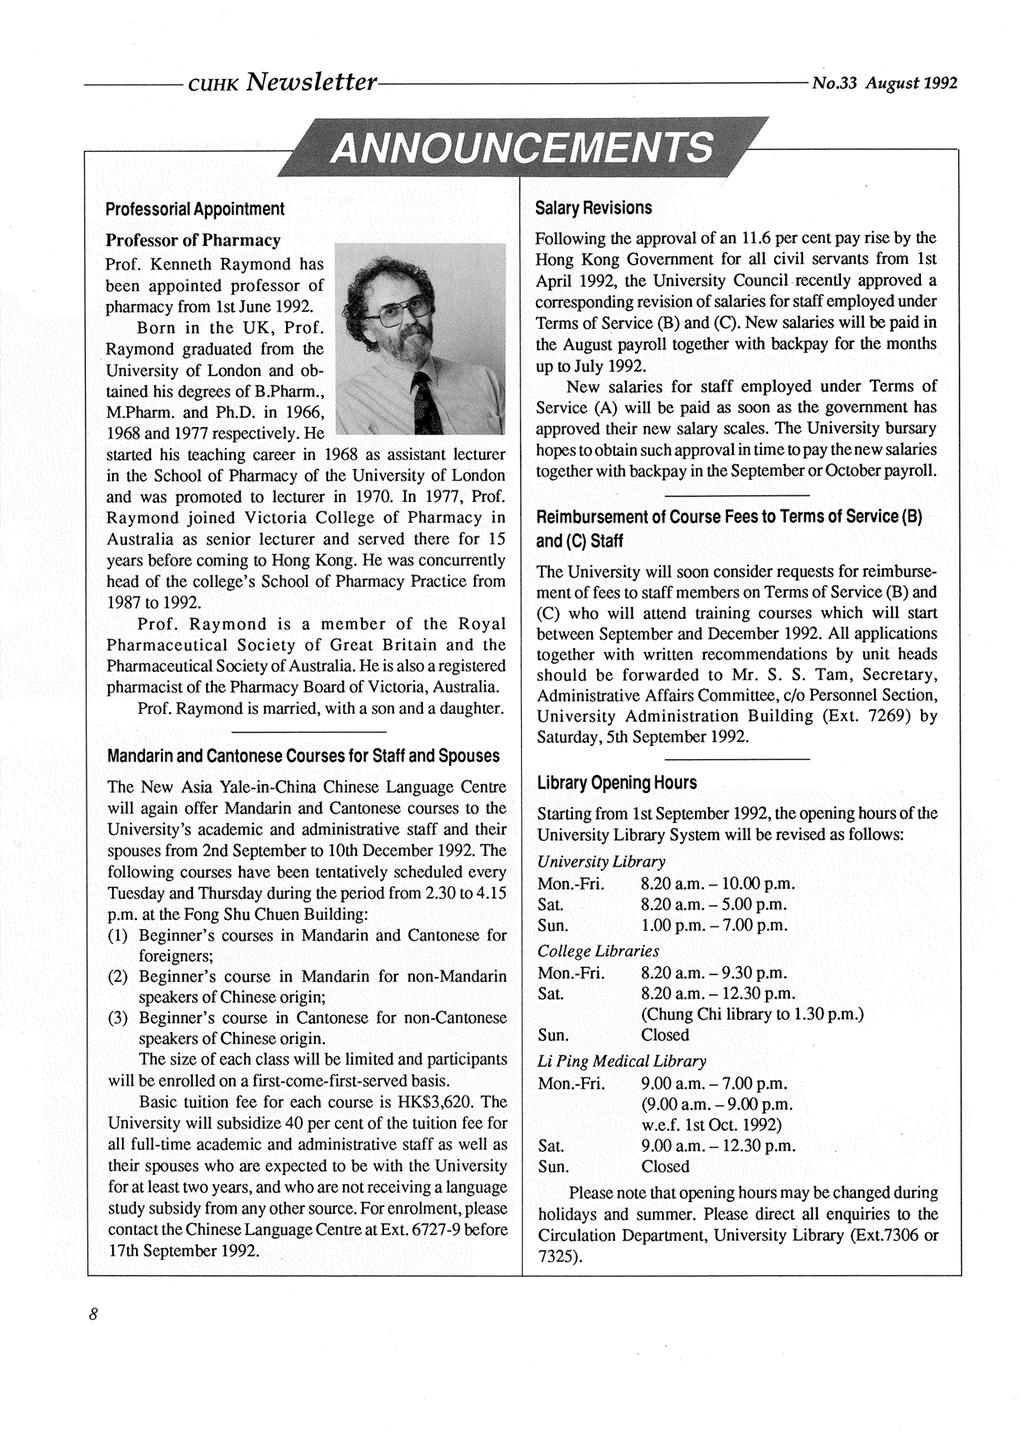 CUHK Newsletter No.33 August 1992 ANNOUNCEMENTS Professorial Appointment Professor of Pharmacy Prof. Kenneth Raymond has been appointed professor of pharmacy from 1st June 1992. Born in the UK, Prof.